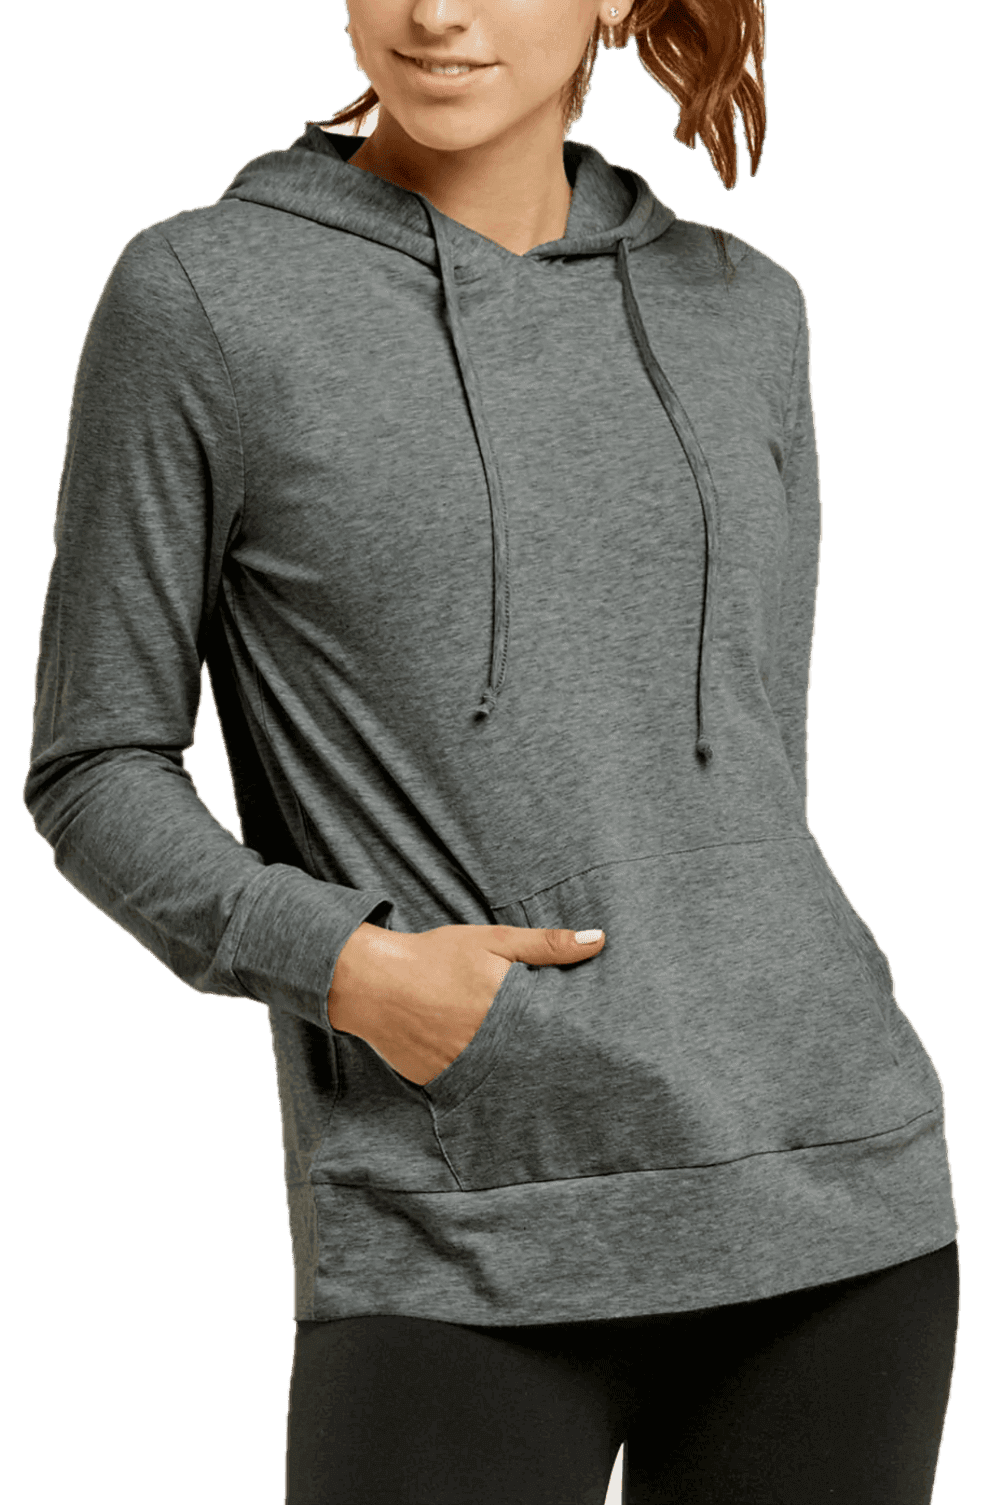 Women's Active Casual Thin Cotton Pullover Hoodie, Navy M, 1 Count, 1 Pack  